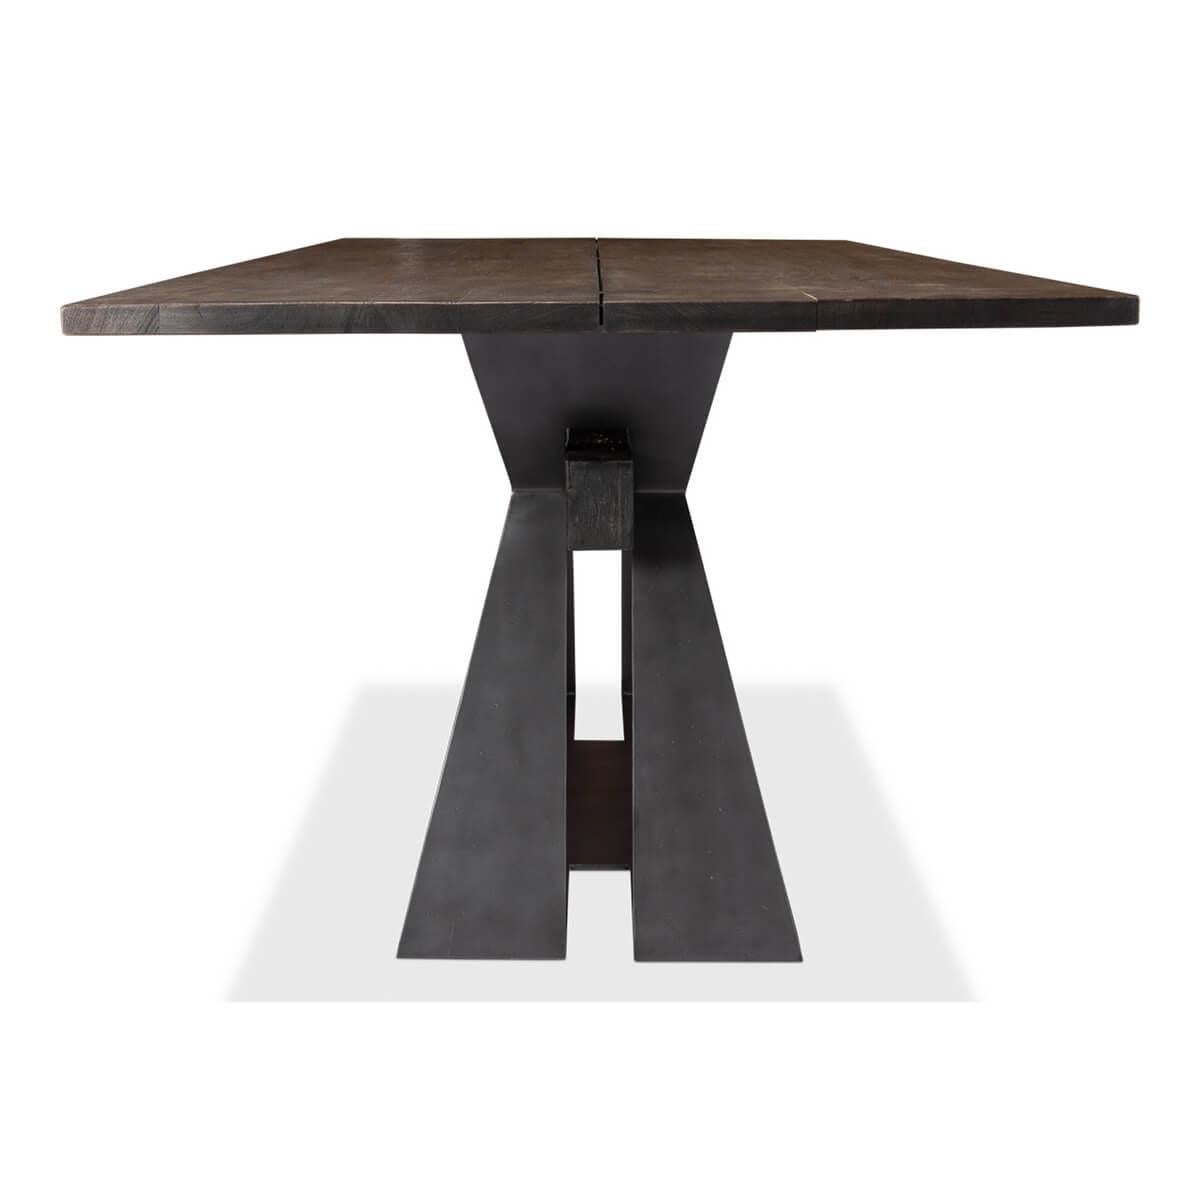 A Modern Industrial design dining table. Heavy and practical, and yet at the time elegant and appearing weightless, the design was inspired by the craftsmanship of the industrial-era steelworks, incorporating the beauty of solid hardwood acacia.